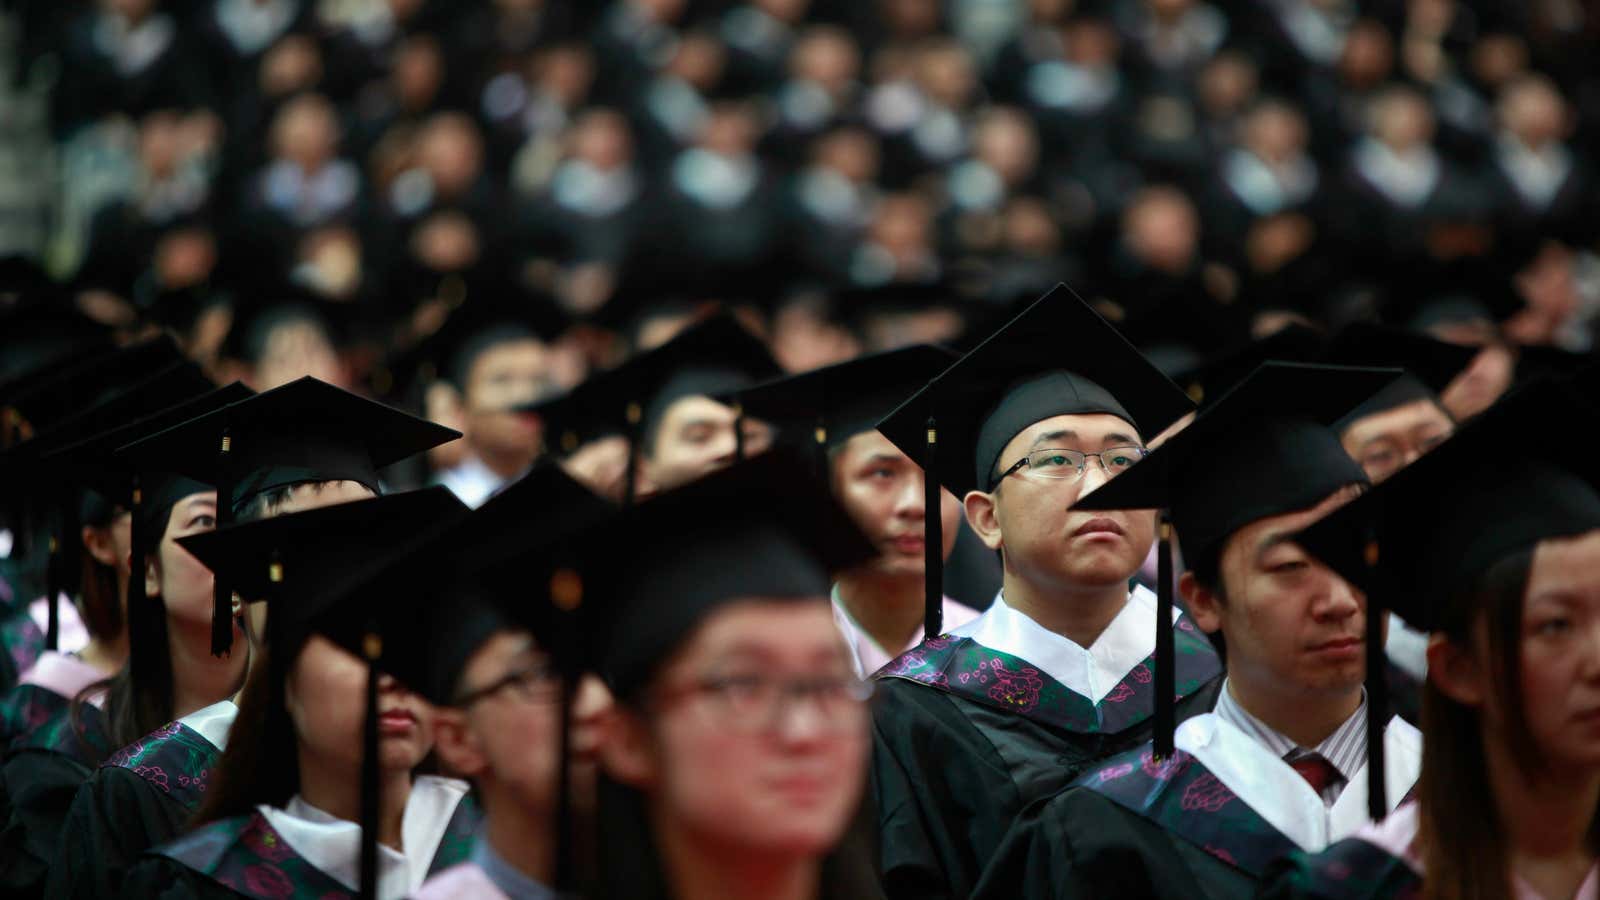 By now, China has more college graduates than the US.